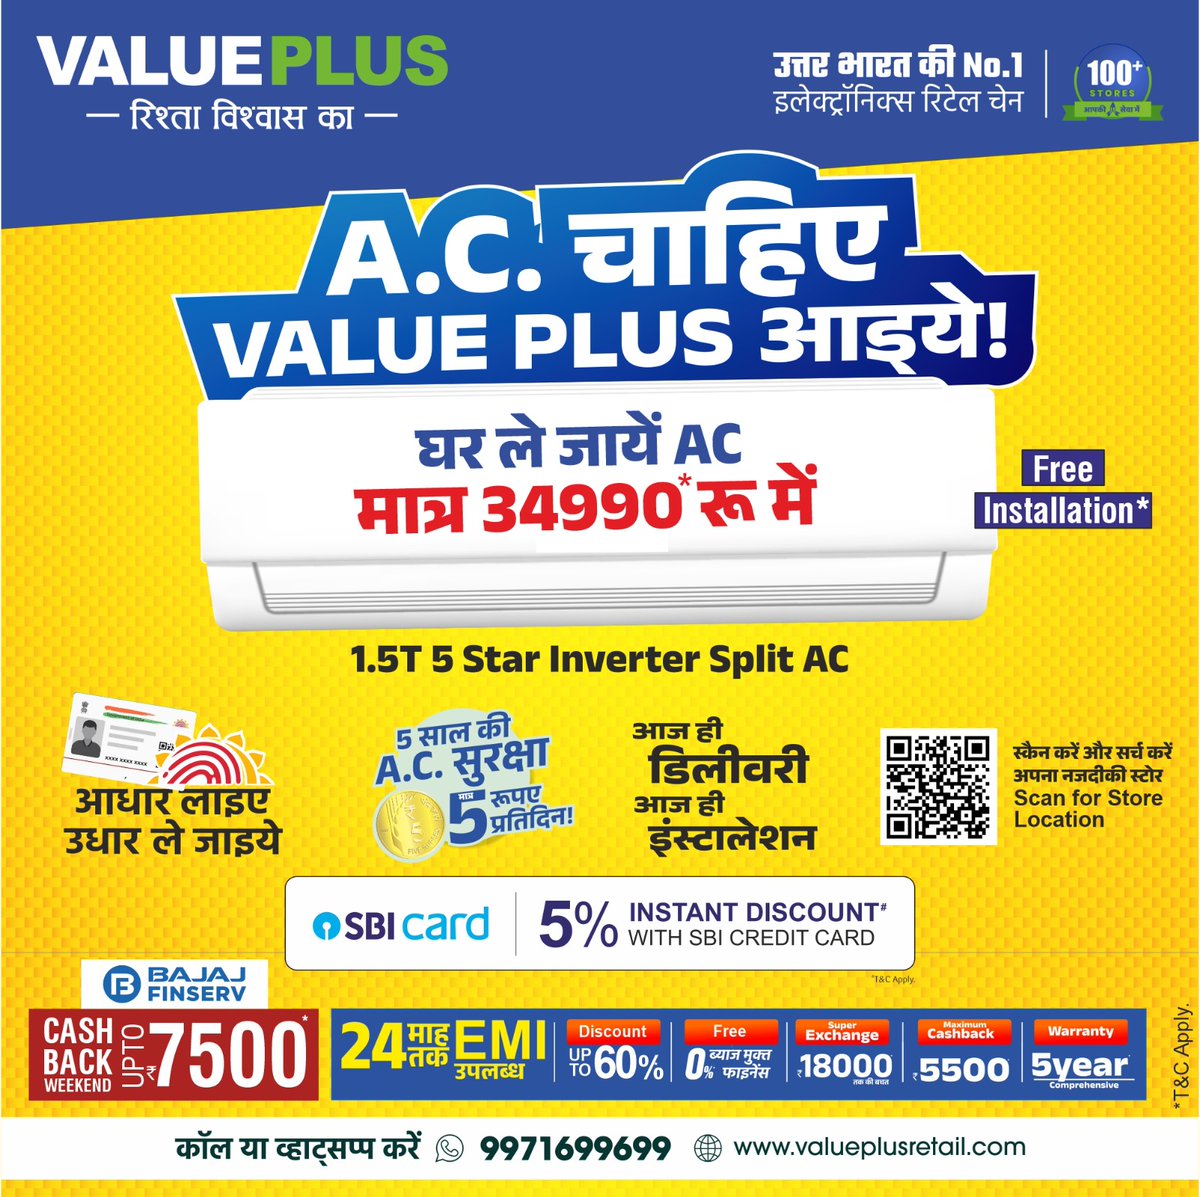 Buy your AC for just Rs 34,990* 😍💥 Grab amazing offers on AC: 'Get Free Installation' buy today! Visit your nearest Value Plus store, call ☎ 9971699699, or visit valueplusretail.com. t&C apply*. #acchahiyevalueplusaiye #freeinstallation #5StarSplitAC #UpgradeyourHome